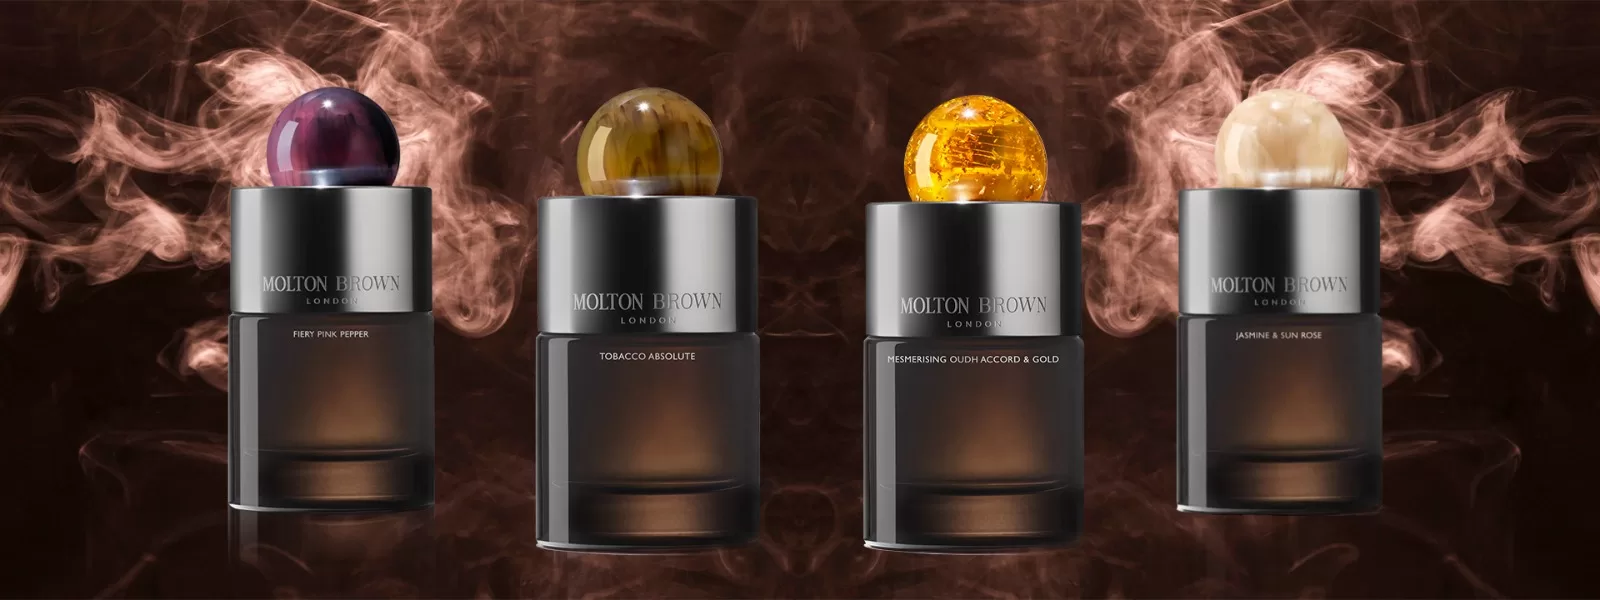 The Ultimate Guide To The Molton Brown Fragrances